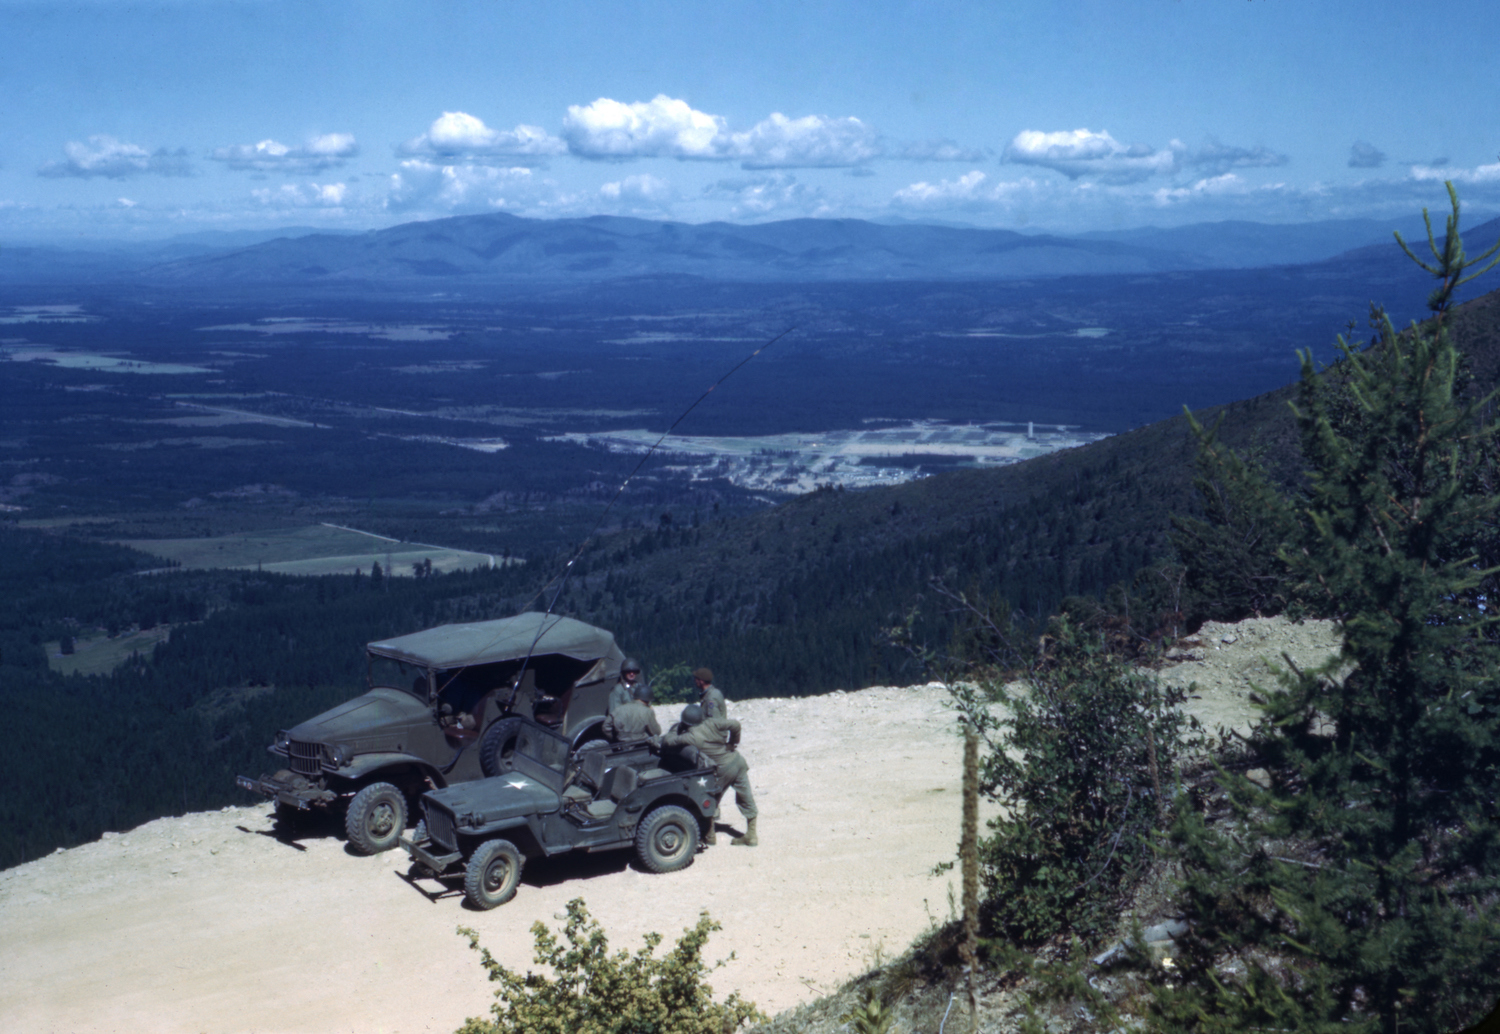 American auto manufacturers pioneered mass-produced four wheel drive (4WD) vehicles during WW2. All wheel drive (AWD) came later. WW2 is important to the history of 4WD vs. AWD | Jim Heimann Collection/Getty Images